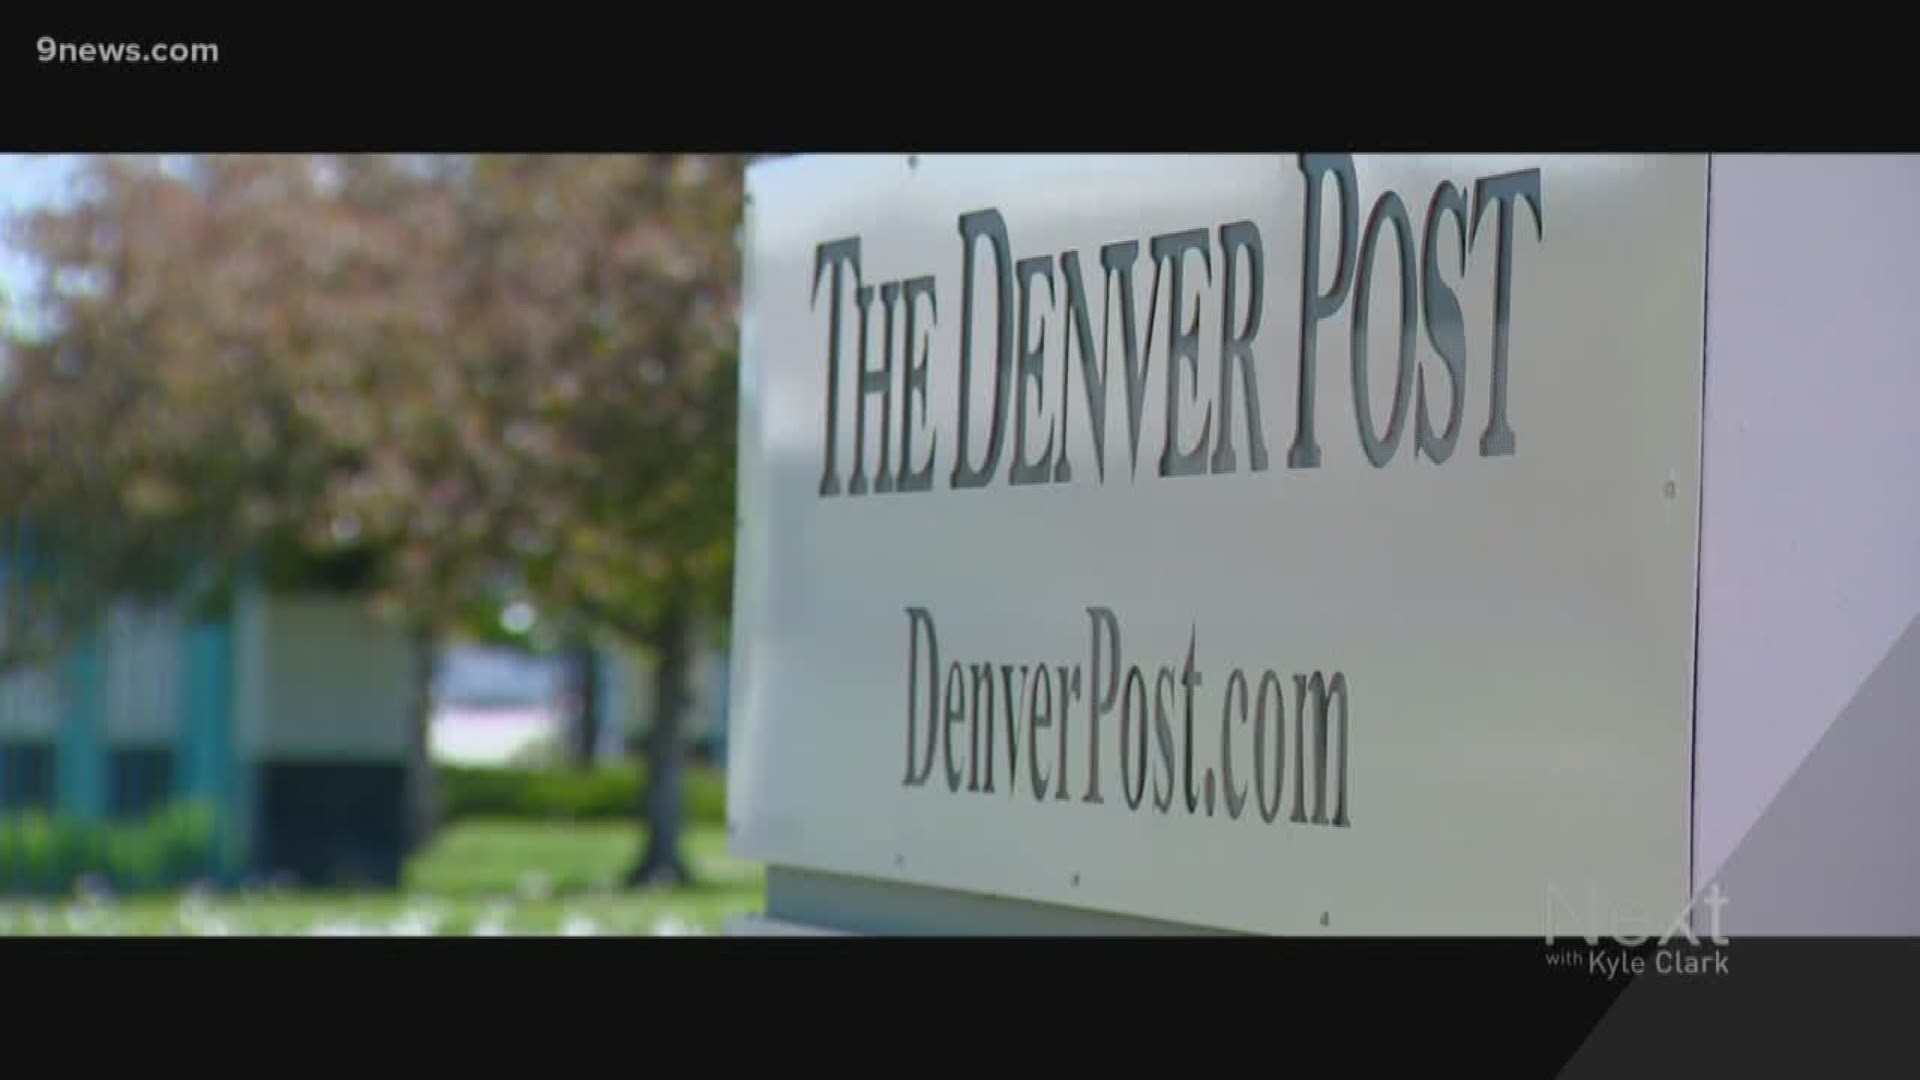 A former journalist now on Denver City Council is asking others to lend their voices in a symbolic move - demanding Alden Global Capitol invest in, or sell, the Post